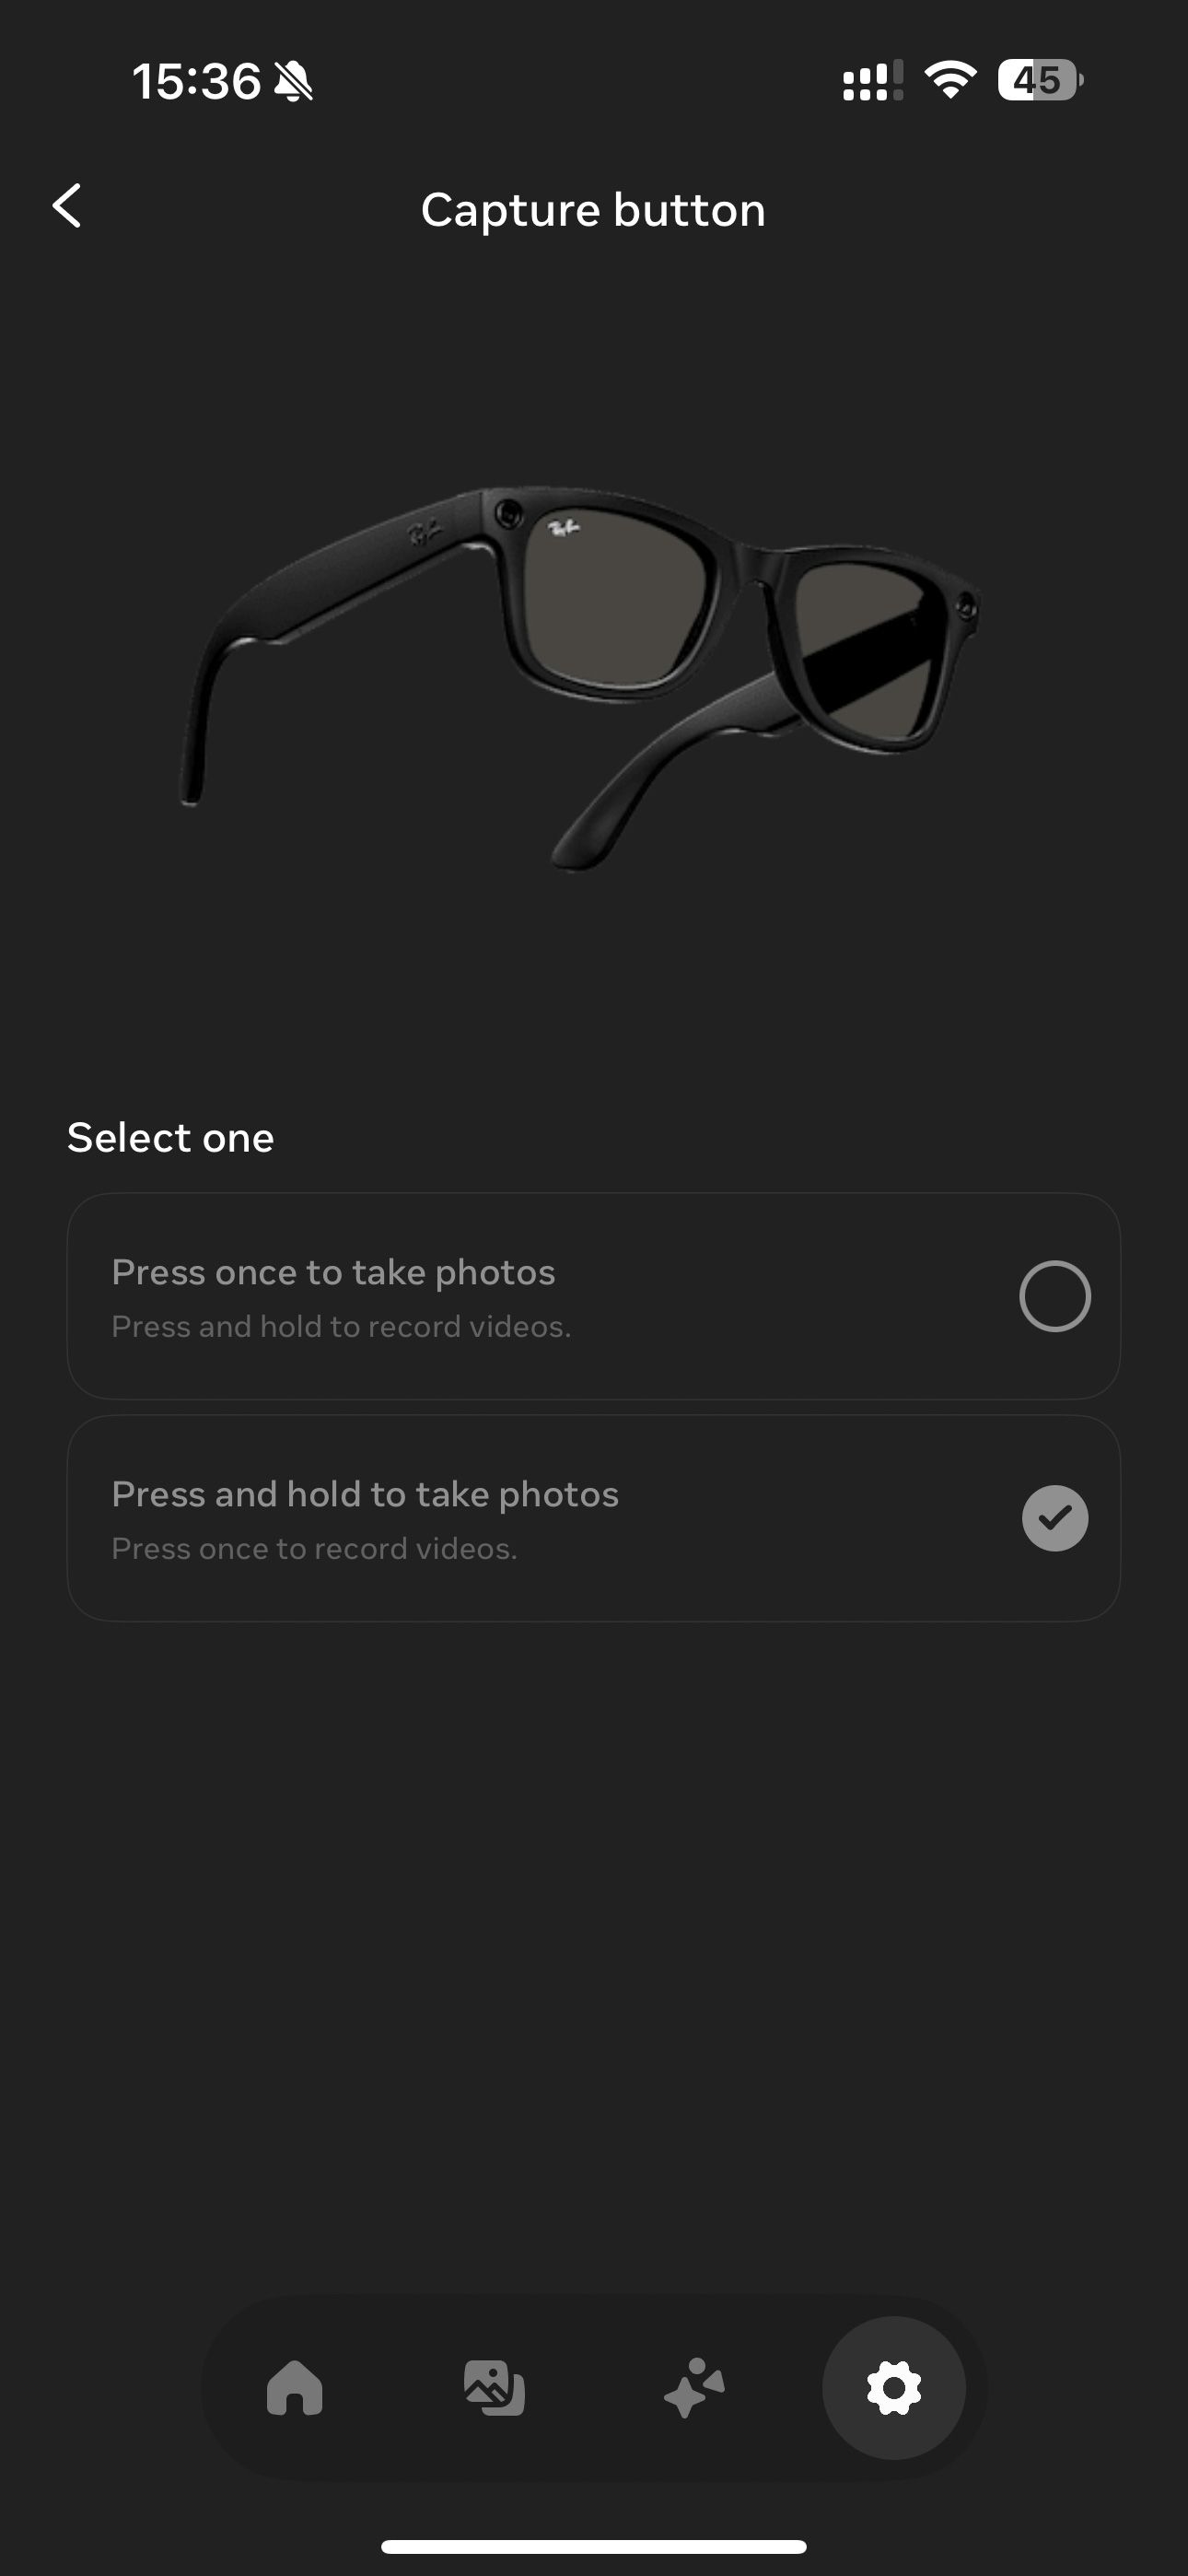 Capture button options inside the Ray-Ban Meta View app